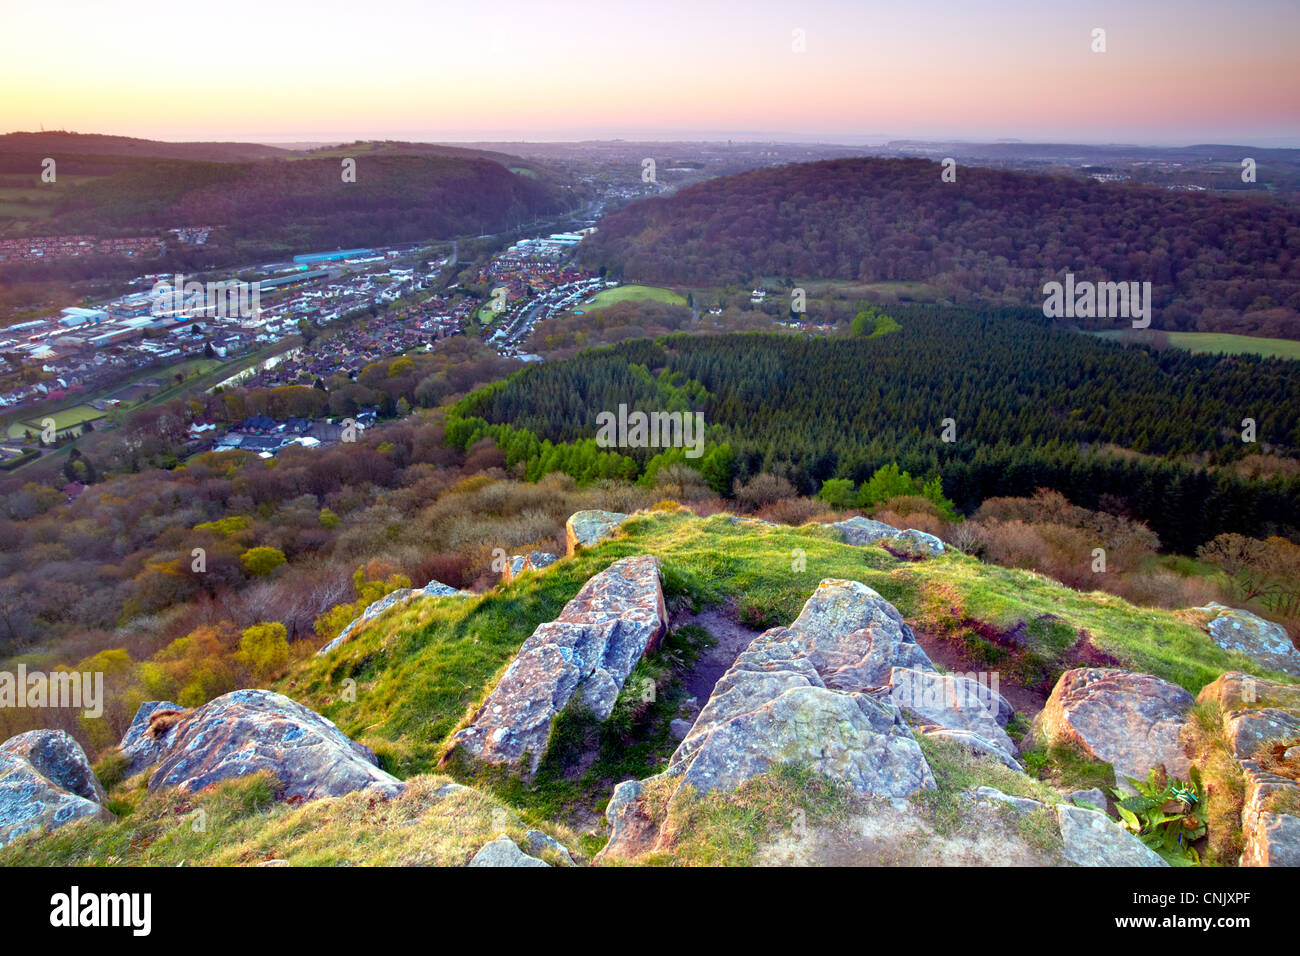 View from Garth mountain over Taffs Well and Cardiff, South Wales, early morning. Stock Photo